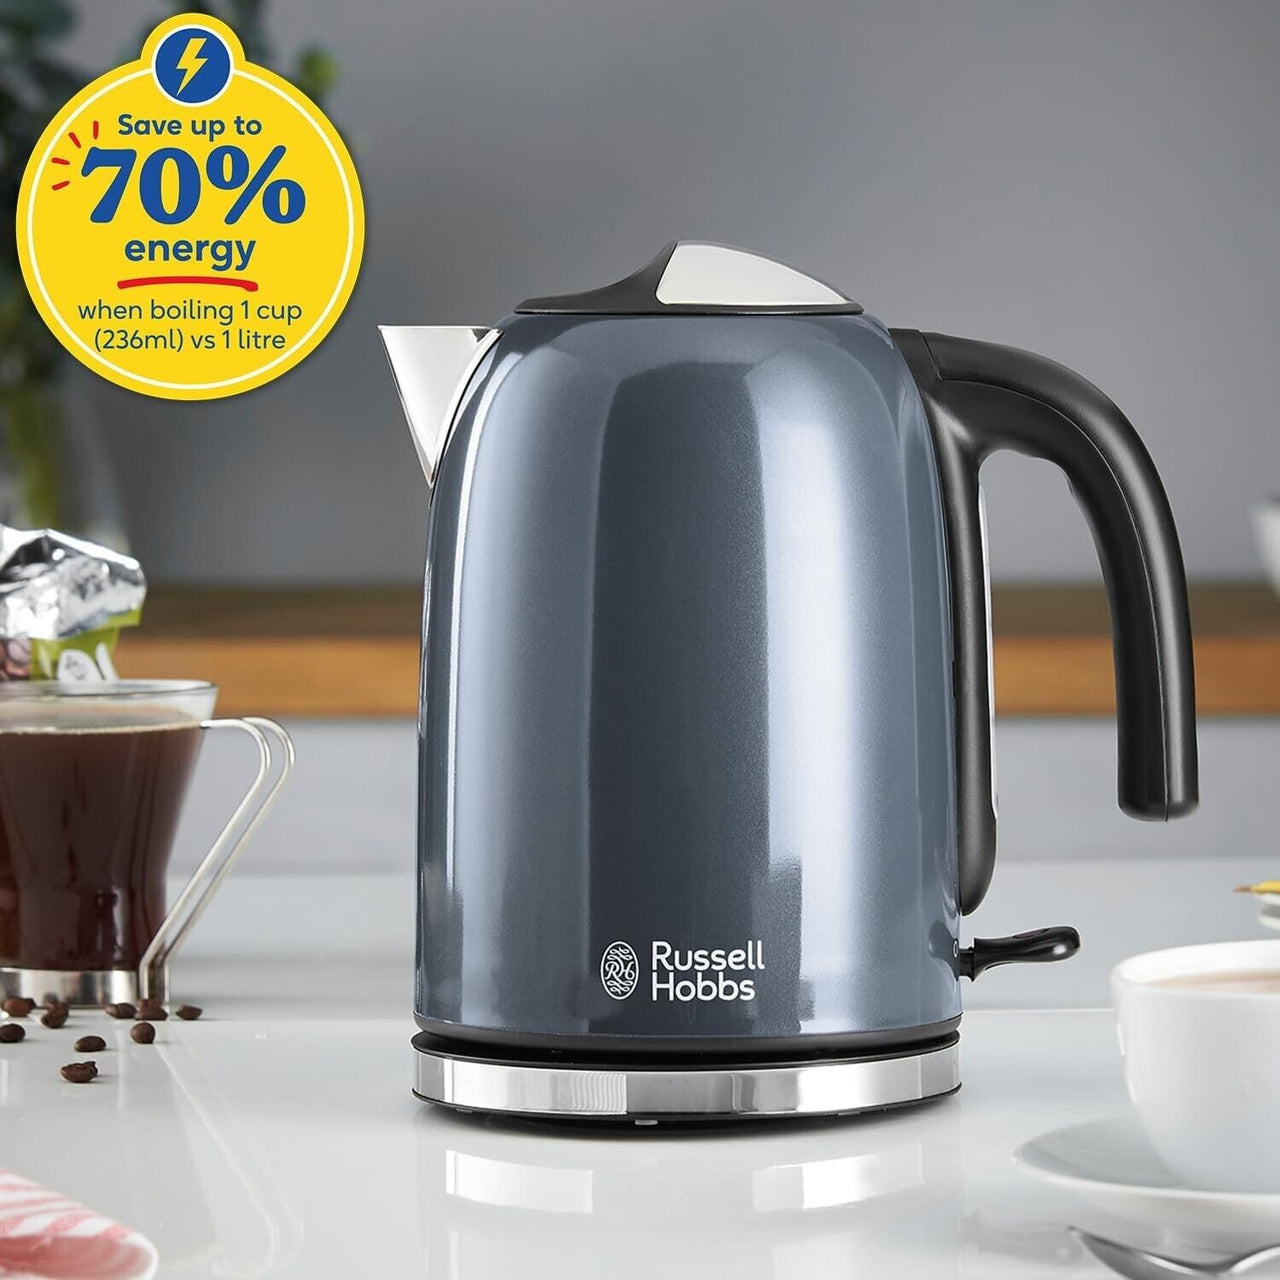 Russell Hobbs Colours Plus Grey 3KW 1.7L Jug Kettle 20414 - 3 Year Guarantee